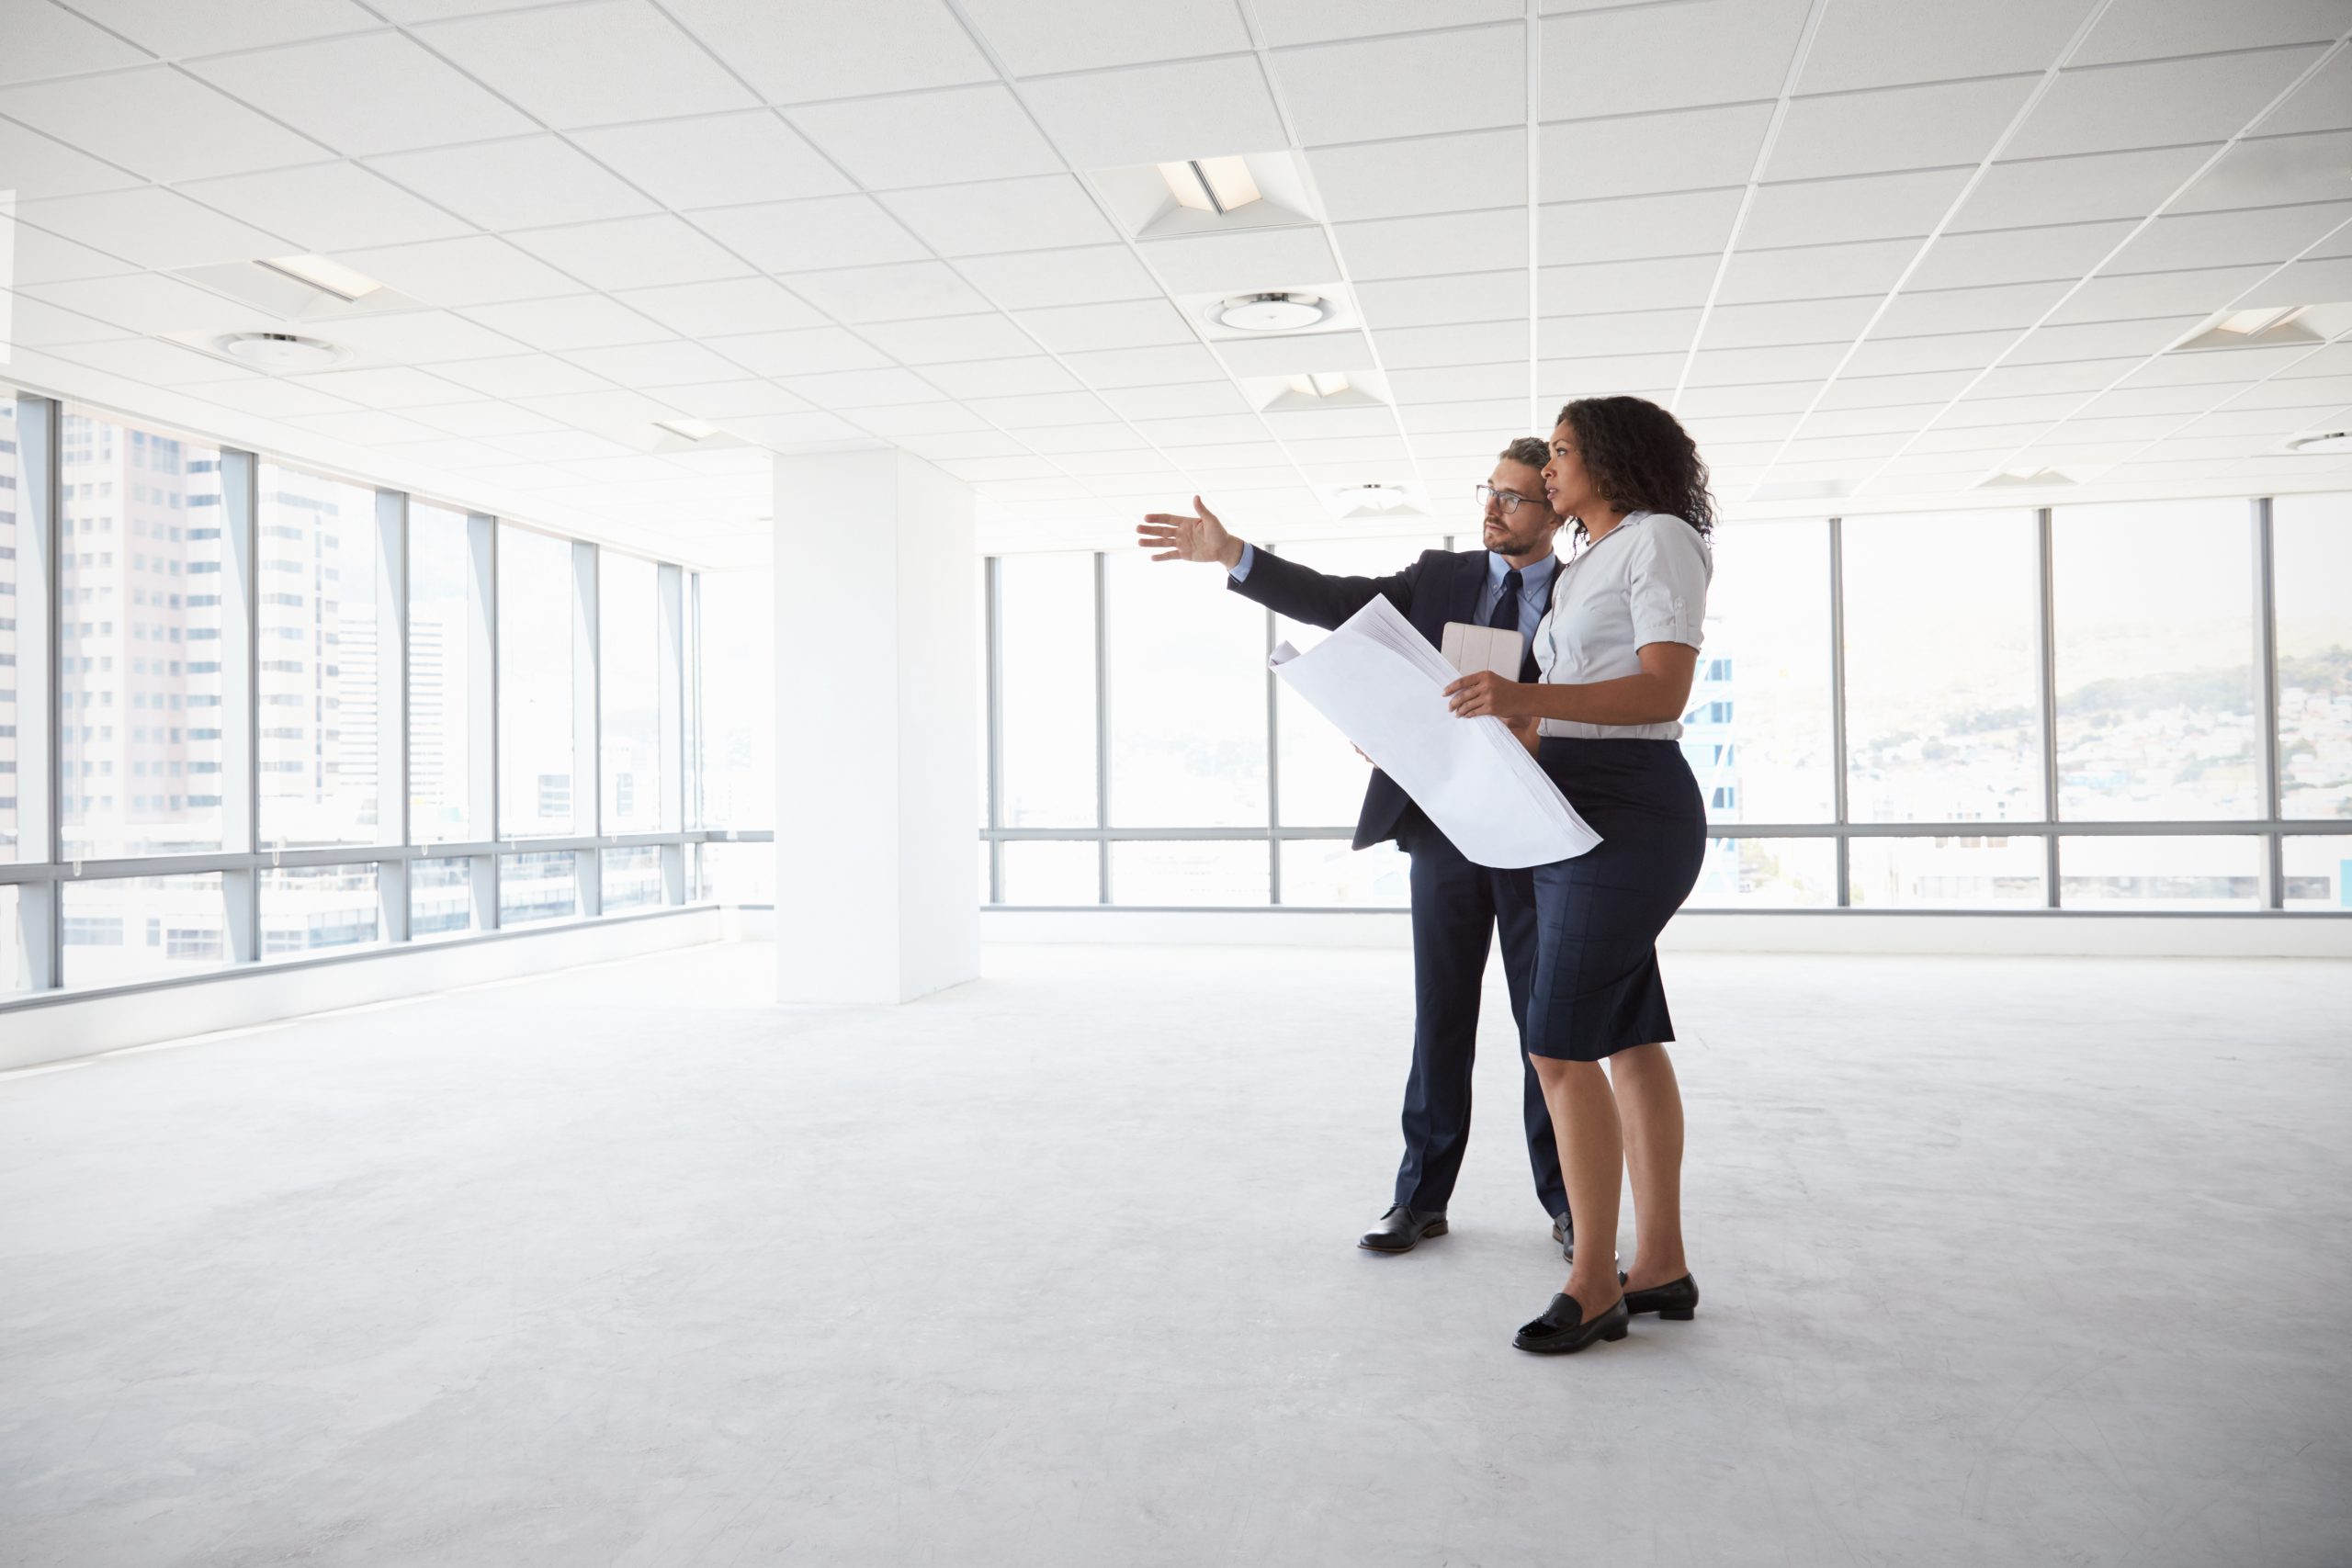 real estate agent helping commercial real estate buyers look at plans in an empty office